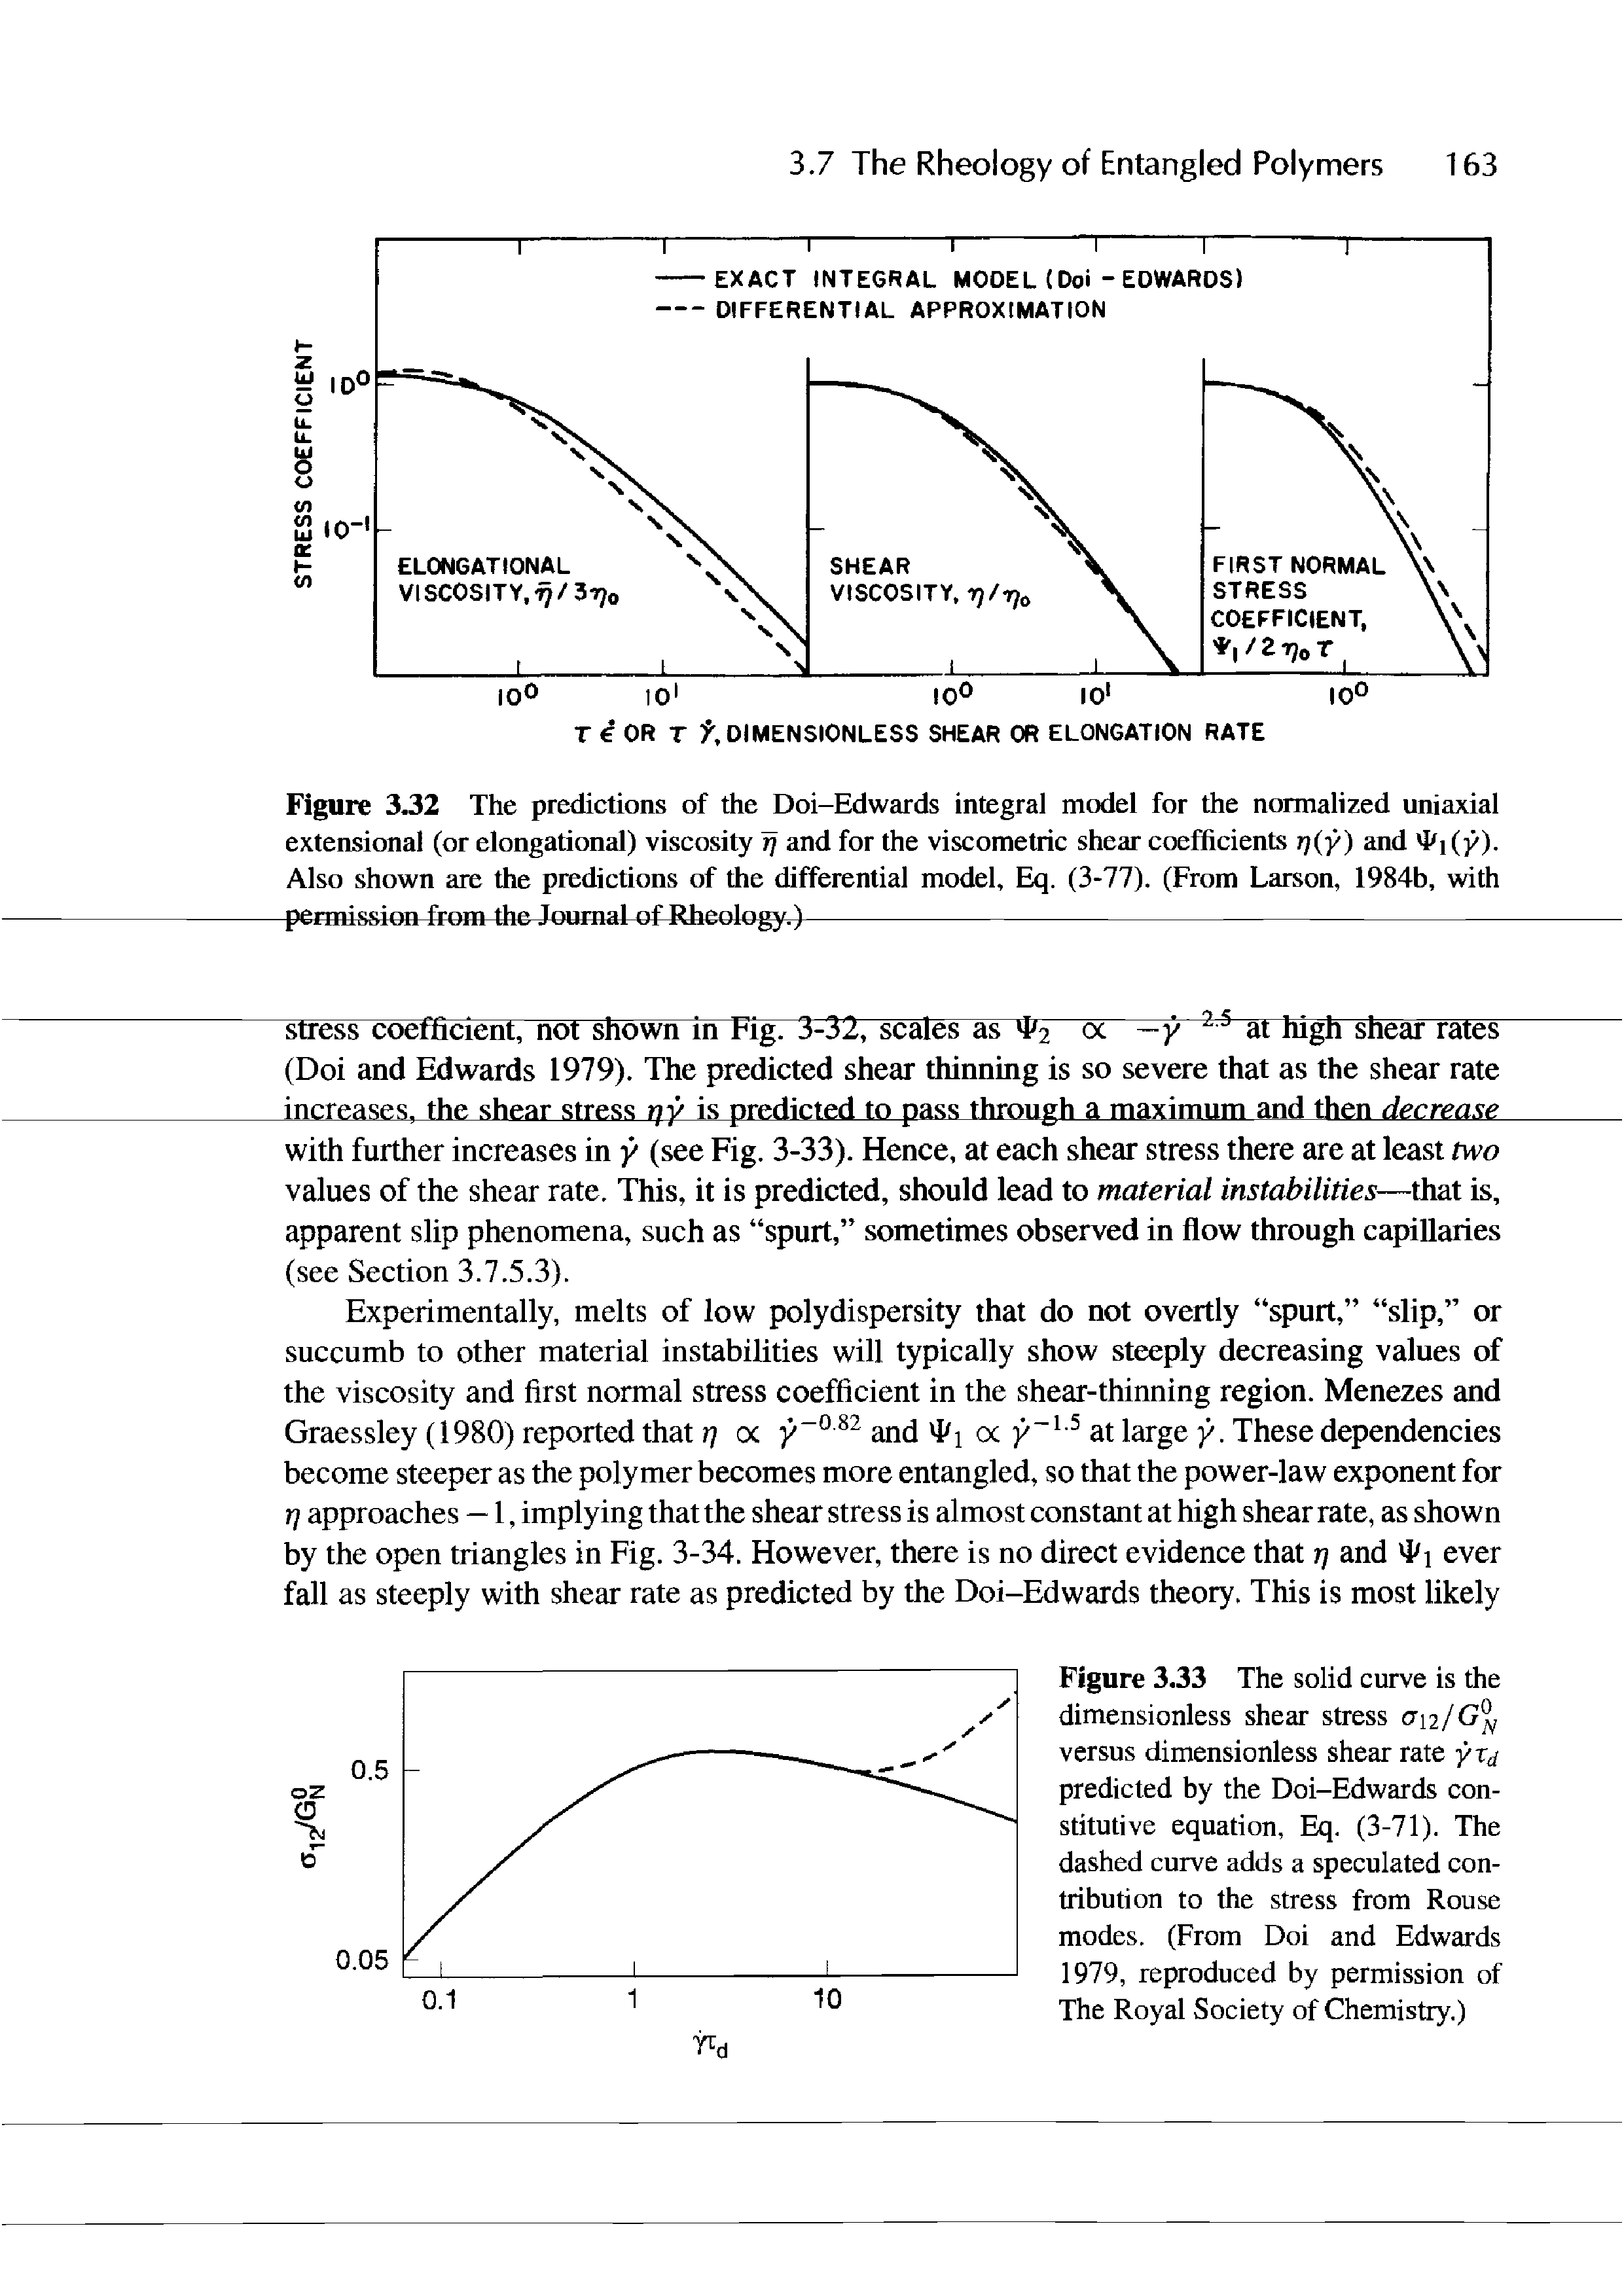 Figure 3.32 The predictions of the Doi-Edwards integral model for the normalized uniaxial extensional (or elongational) viscosity rj and for the viscometric shear coefficients r)(y) and i(y). Also shown are the predictions of the differential model, Eq. (3-77). (From Larson, 1984b, with permission from the Journal of Rheology.)--------------------------------------------------...